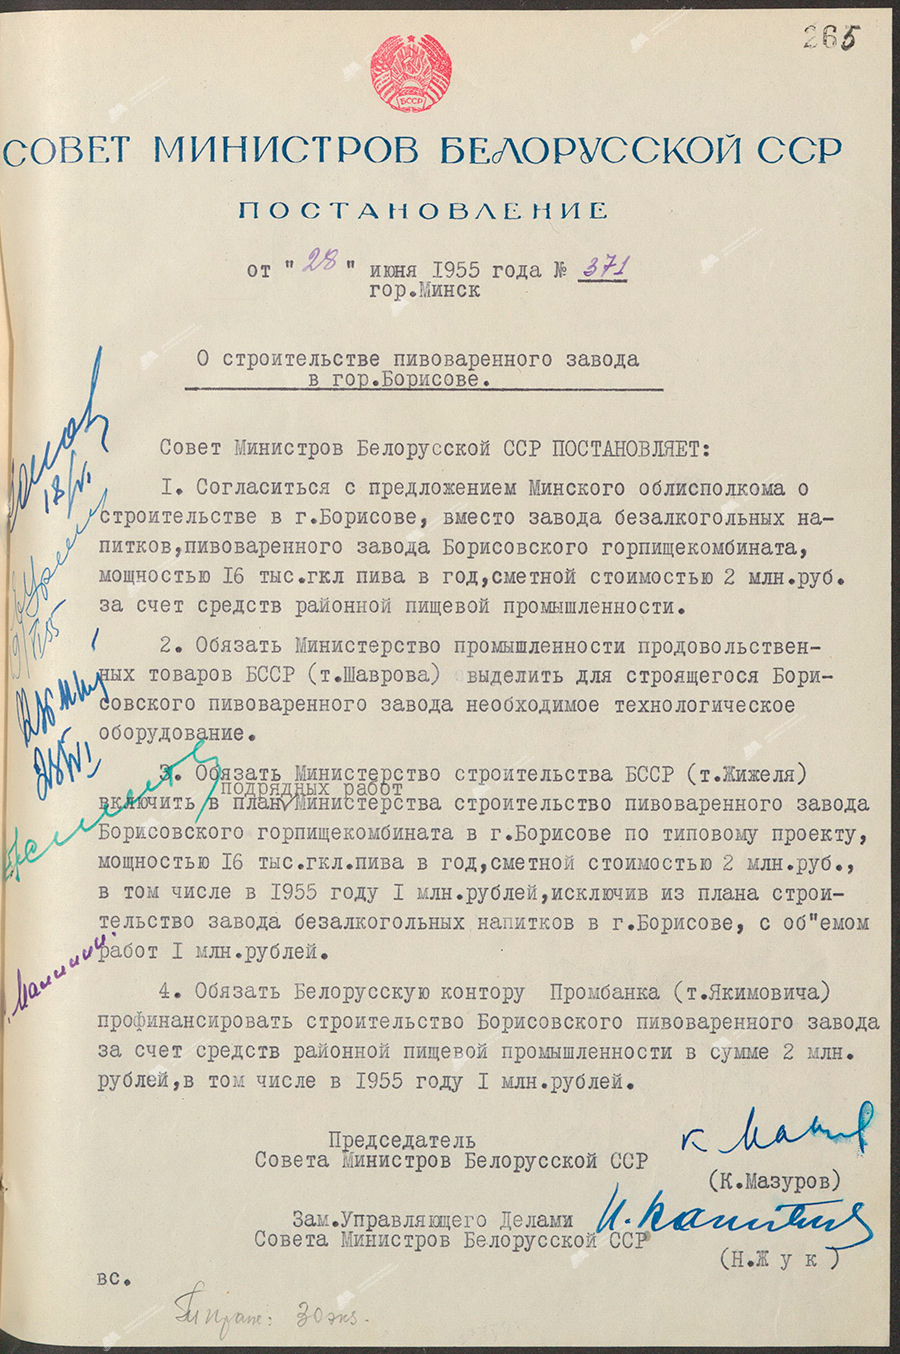 Resolution No. 371 of the Council of Ministers of the Byelorussian SSR «On the construction of a brewery in the city. Borisov»-стр. 0